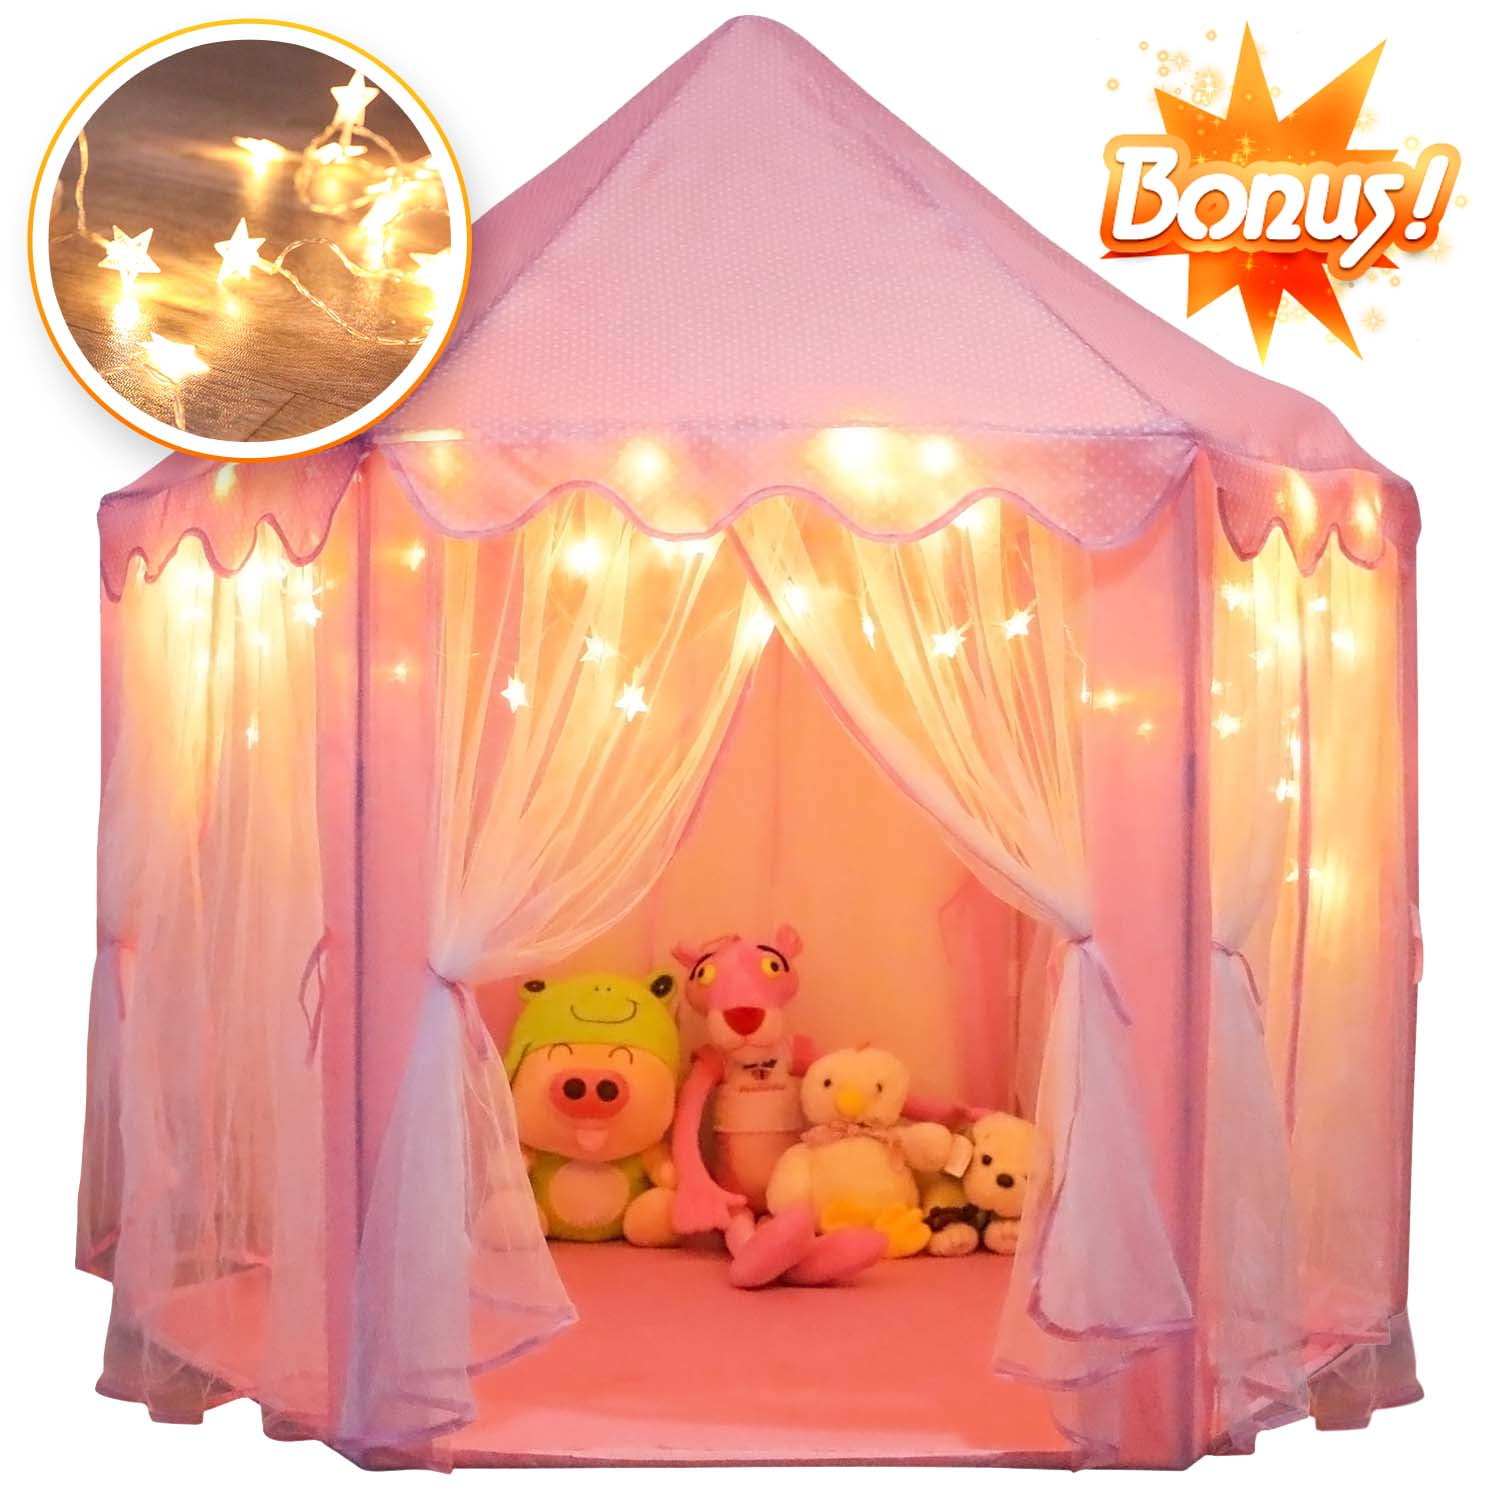 ORIAN Princess Castle Playhouse Tent for Girls with LED Star Lights – Indoor & Outdoor Large Kids Play Tent for Imaginative Games – ASTM Certified Princess Tent Pink 55x53. 230 Polyester Taffeta 